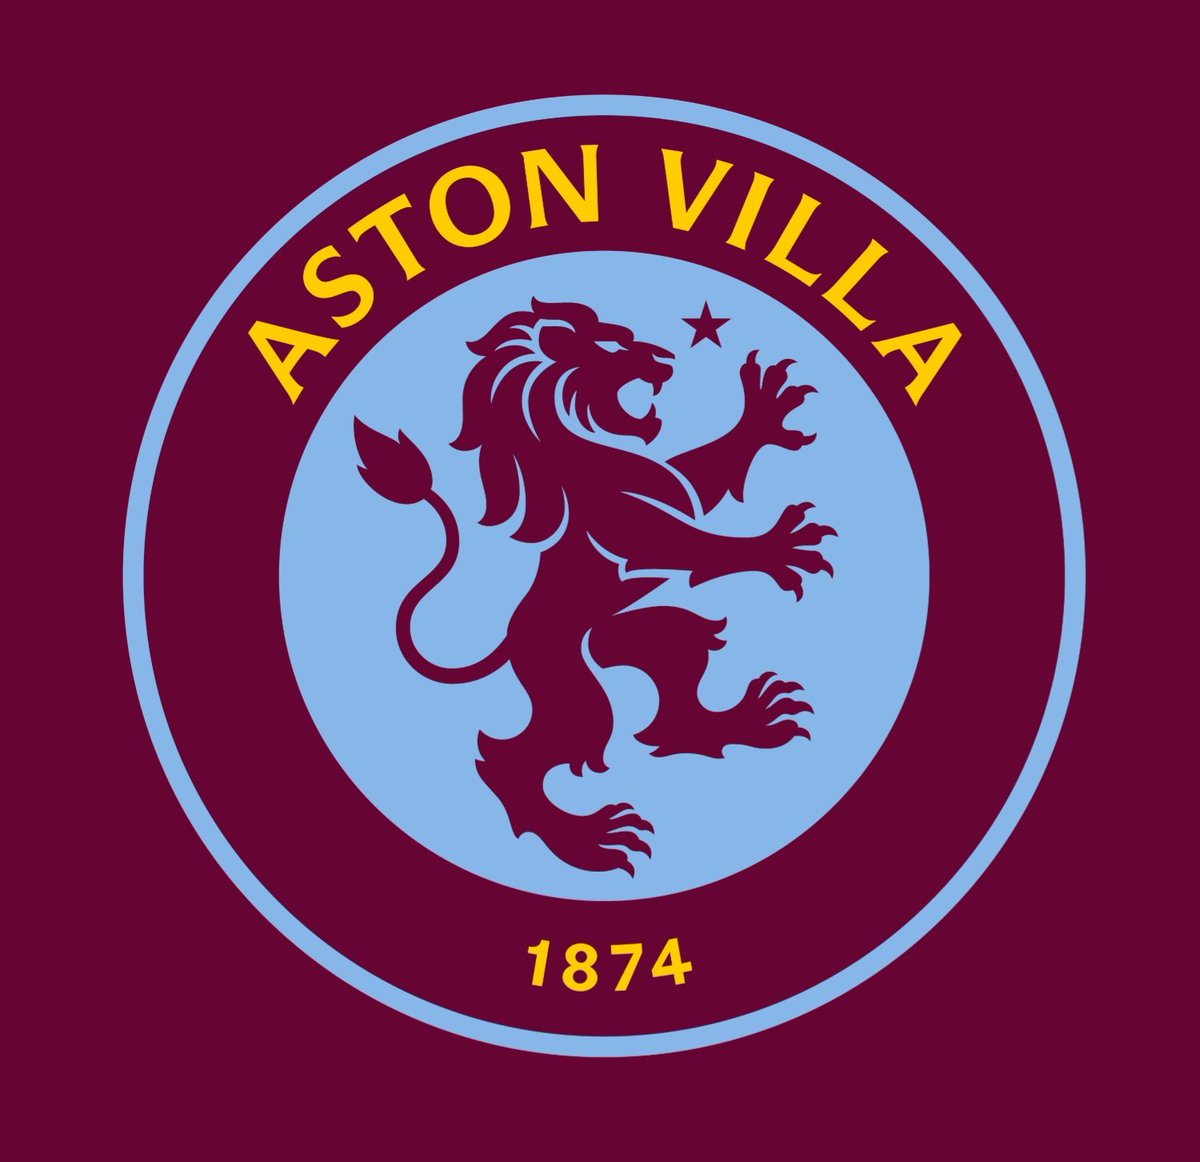 In light of our dismantling of the European Champions Man City

I'd love if all fellow Villans help me get to 1000 followers, followers of the future, dominant force in English football!!!!!

VTWD!!!!

#Avfc